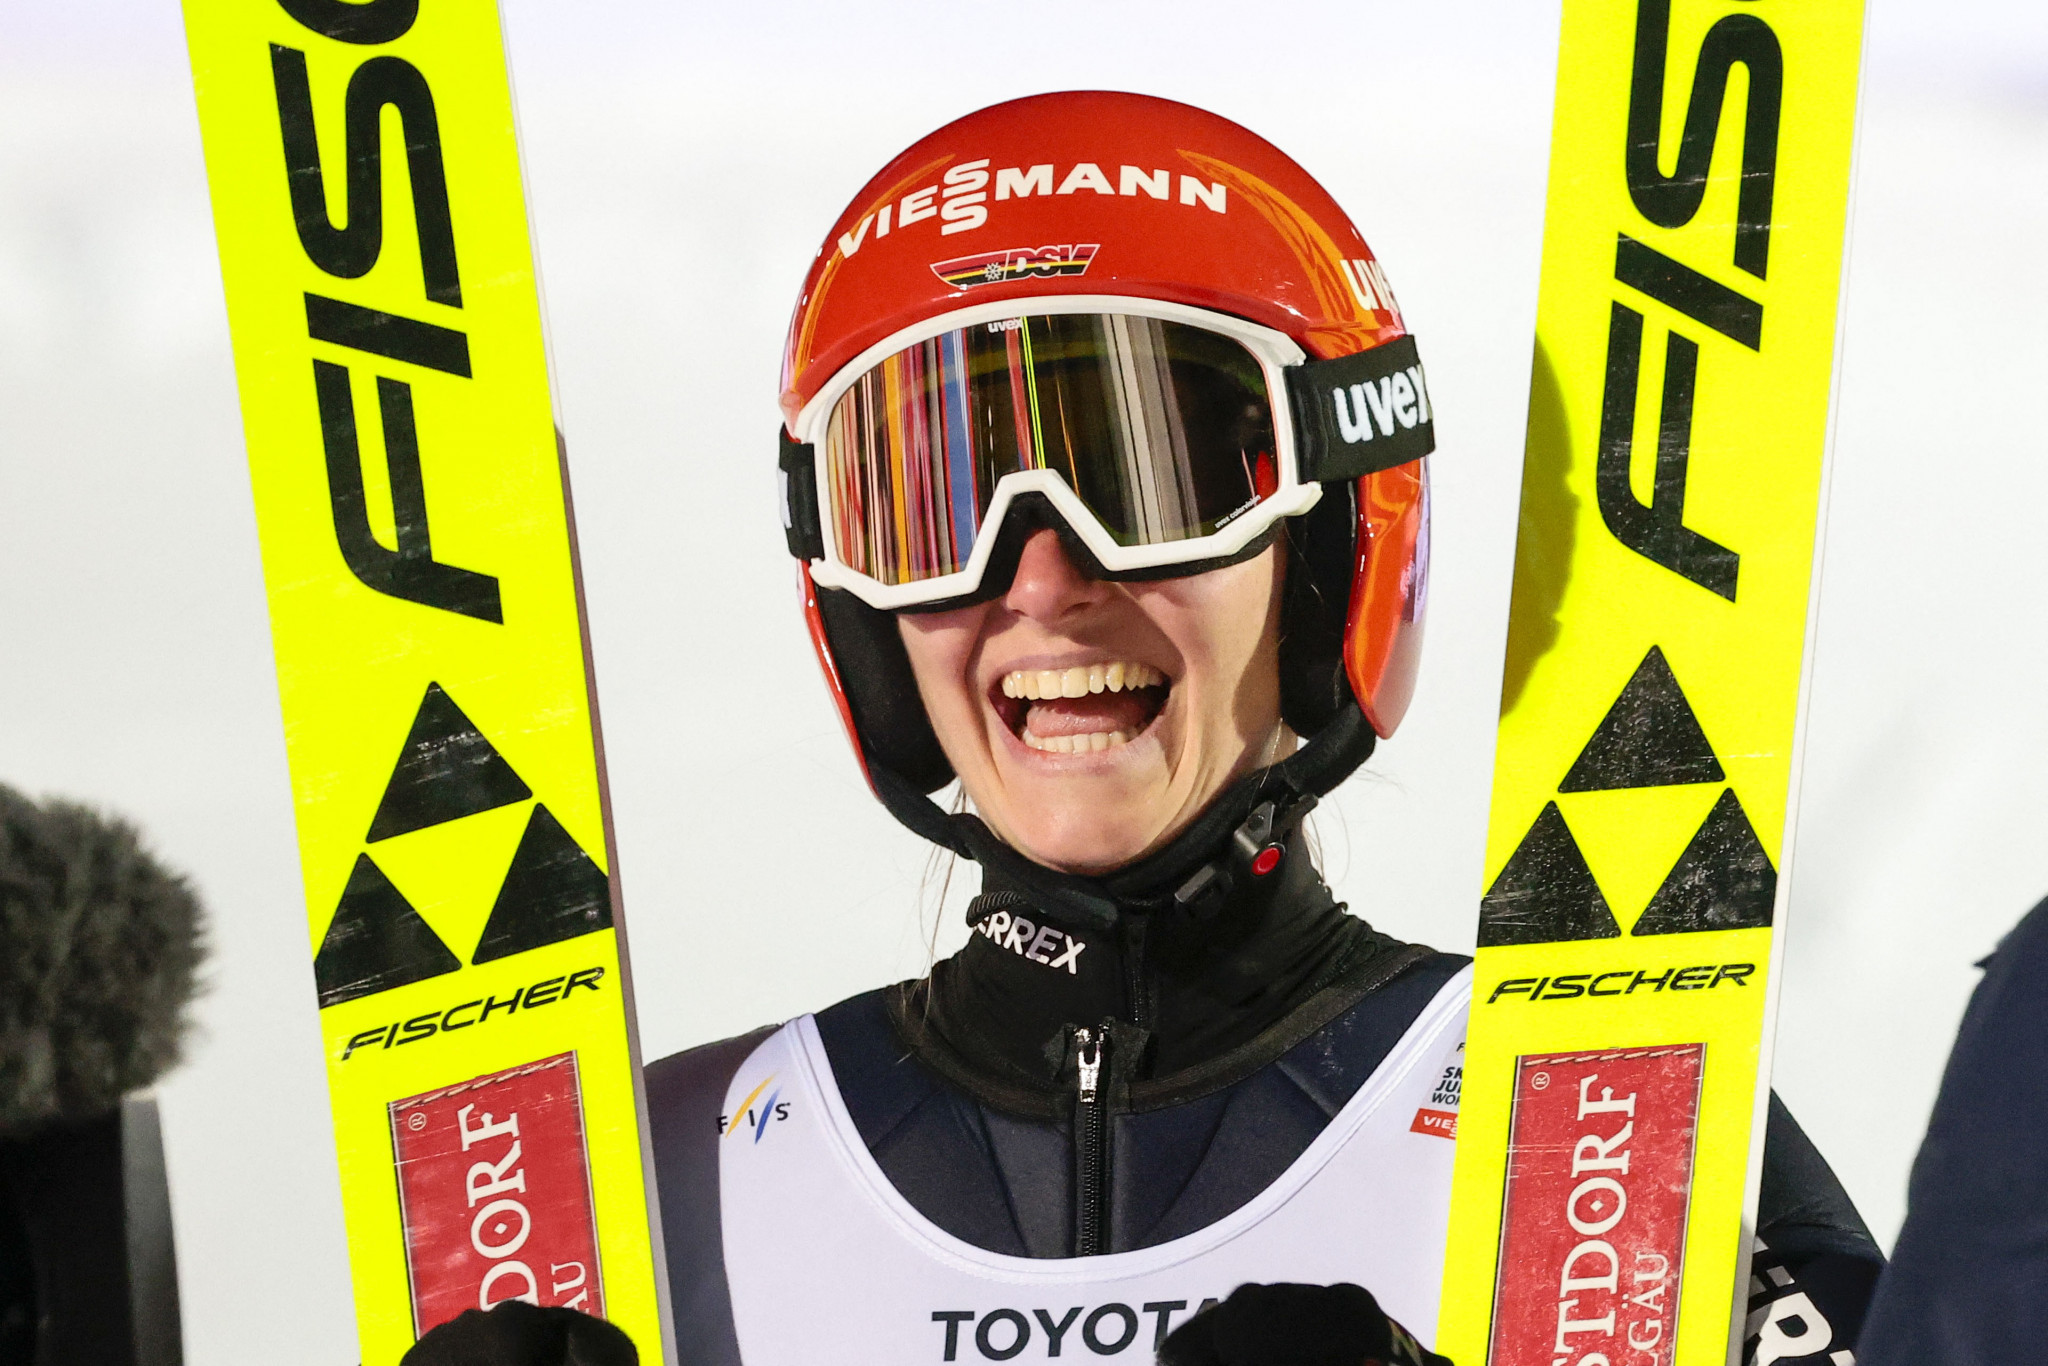 Althaus secures second place in Ski Jumping World Cup after Lillehammer win